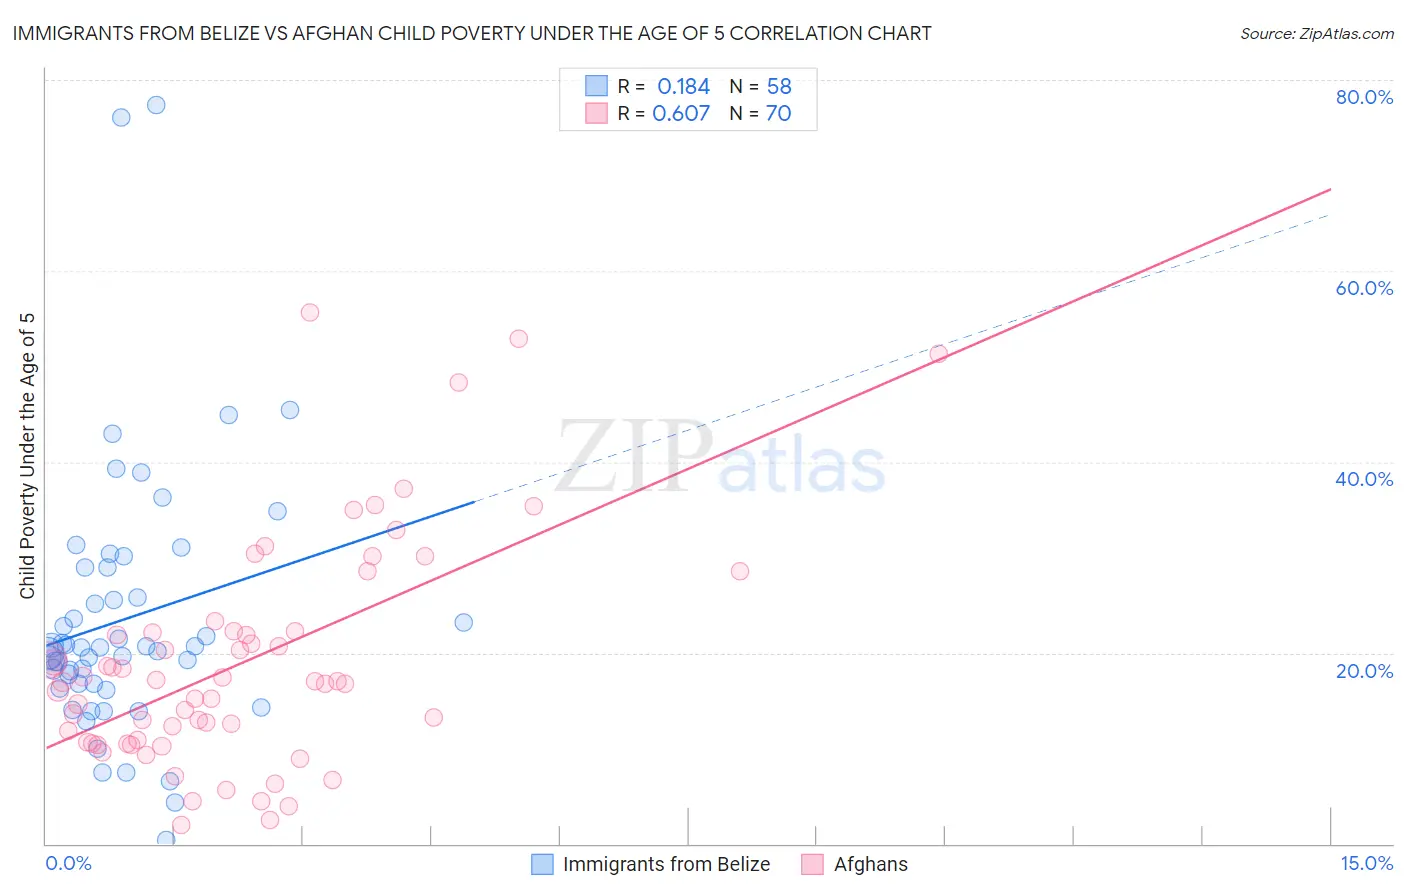 Immigrants from Belize vs Afghan Child Poverty Under the Age of 5